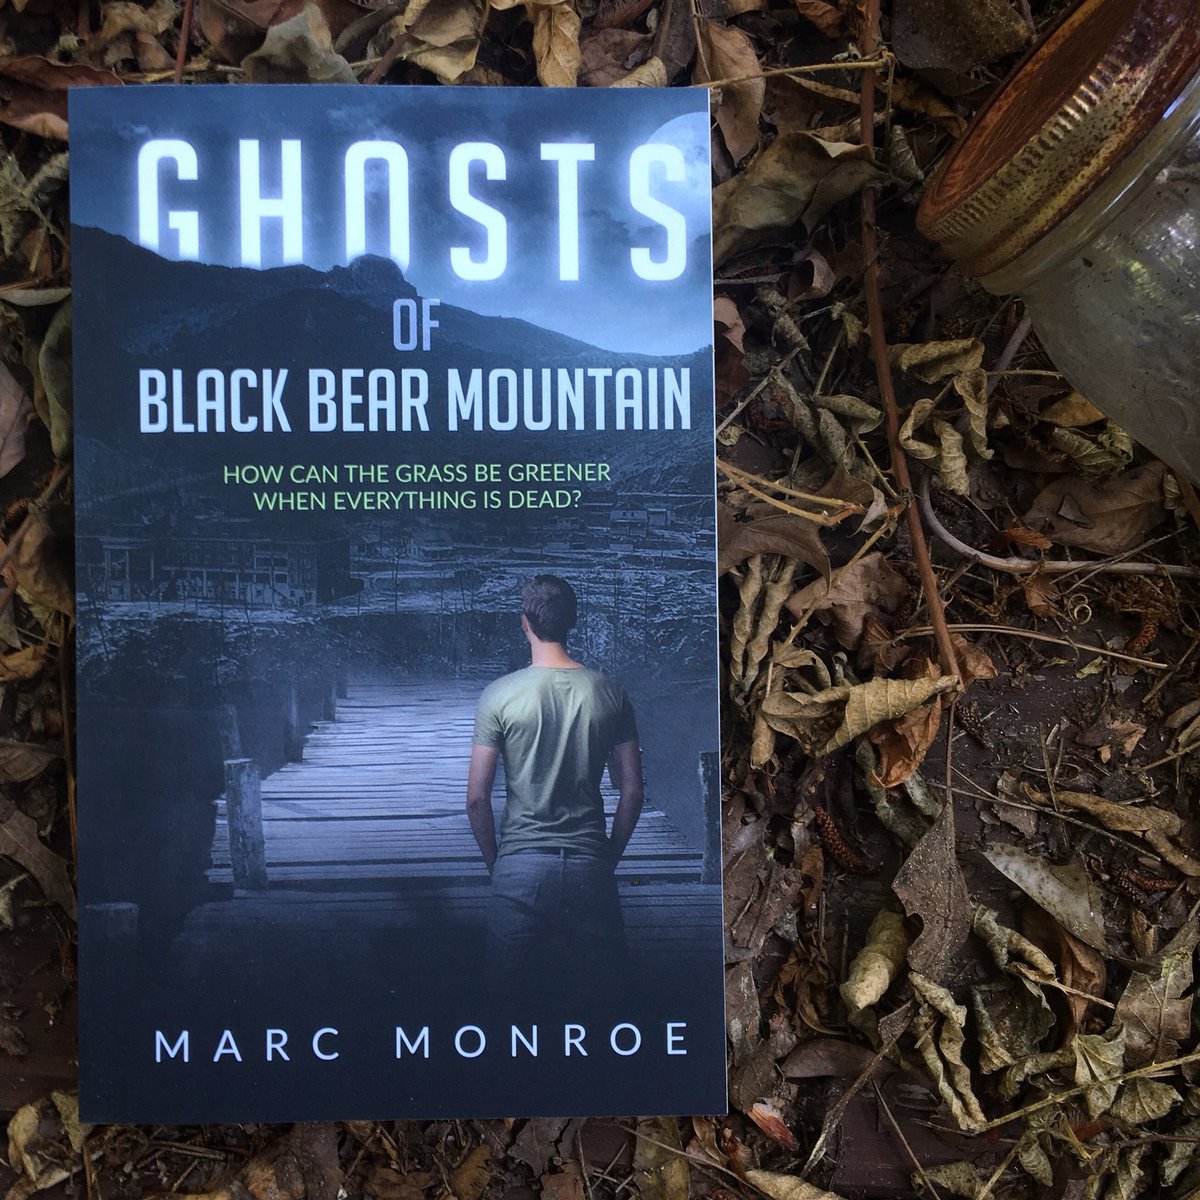 Love Ghost/Horror stories? 32 5-Star reviews on Amazon. Available on Kindle Unlimited for limited time until October 26th. #KindleUnlimited #KindleUnlimitedhorror #KindleUnlimitedghost #KindleUnlimitedparanormal #ghost #ghoststory #horror #paranormal #KindleUnlimitedsuspense #ku